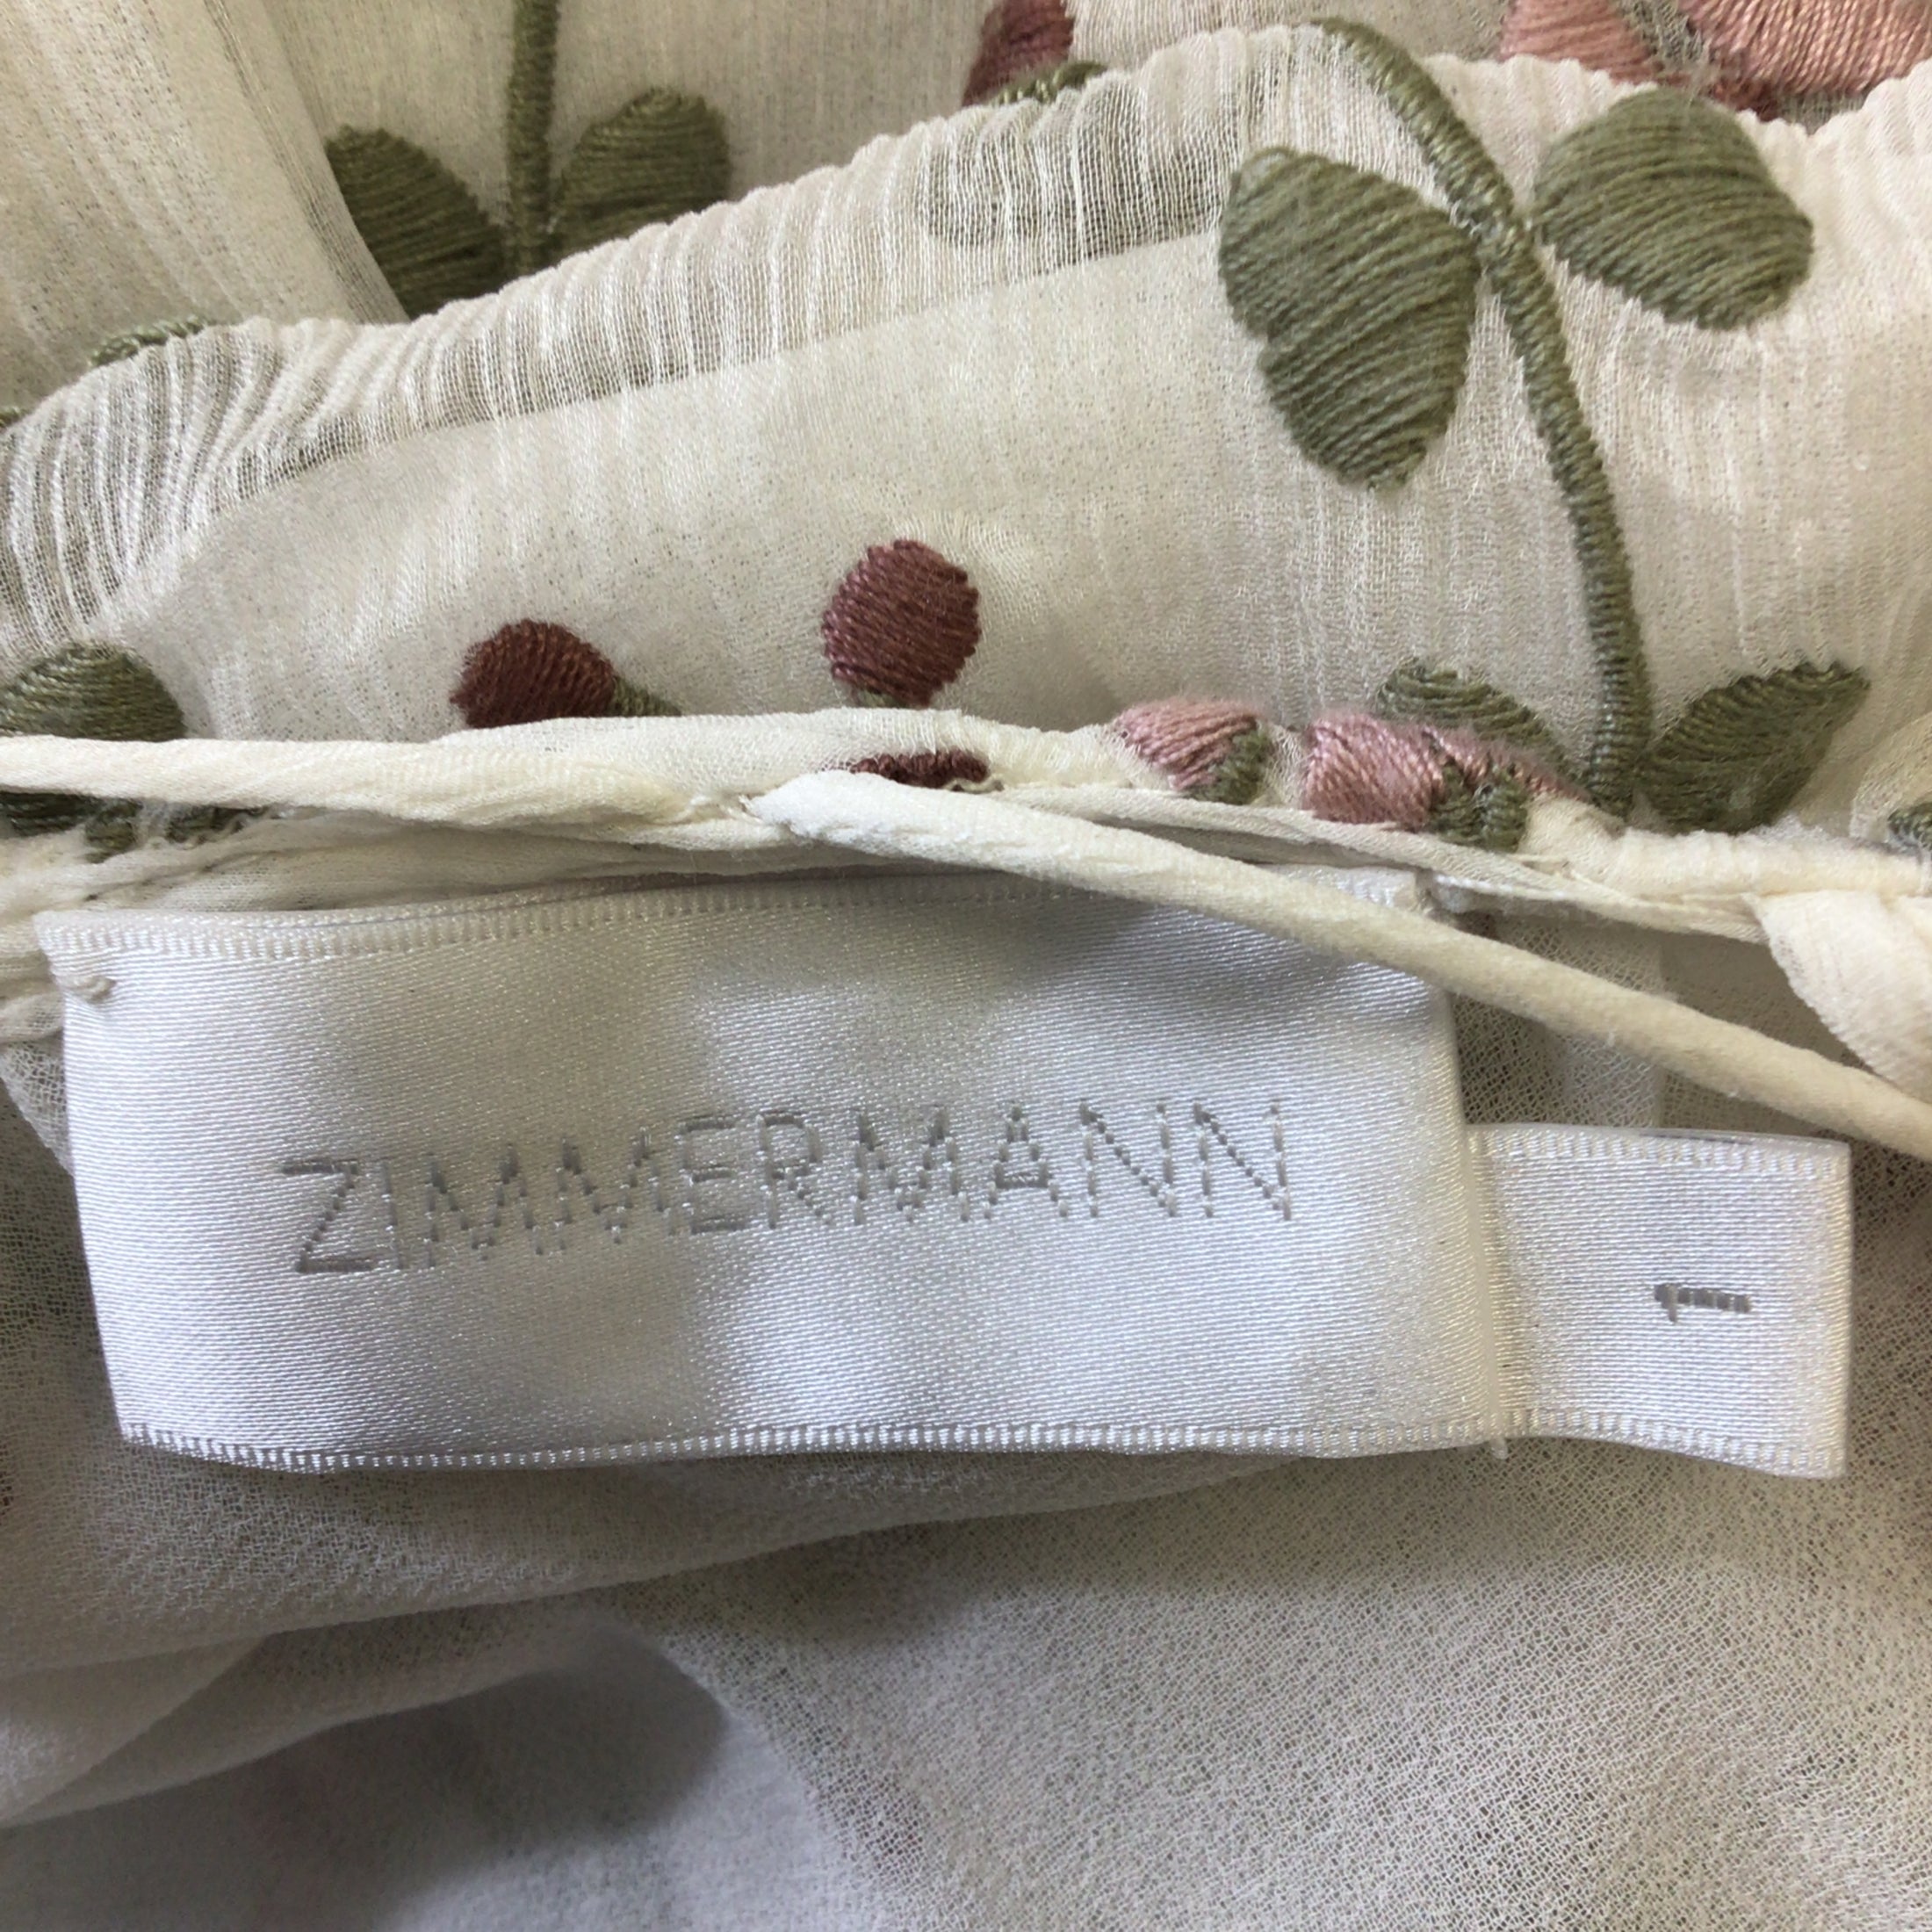 Zimmermann Ivory / Pink / Green Floral Embroidered Jumpsuit